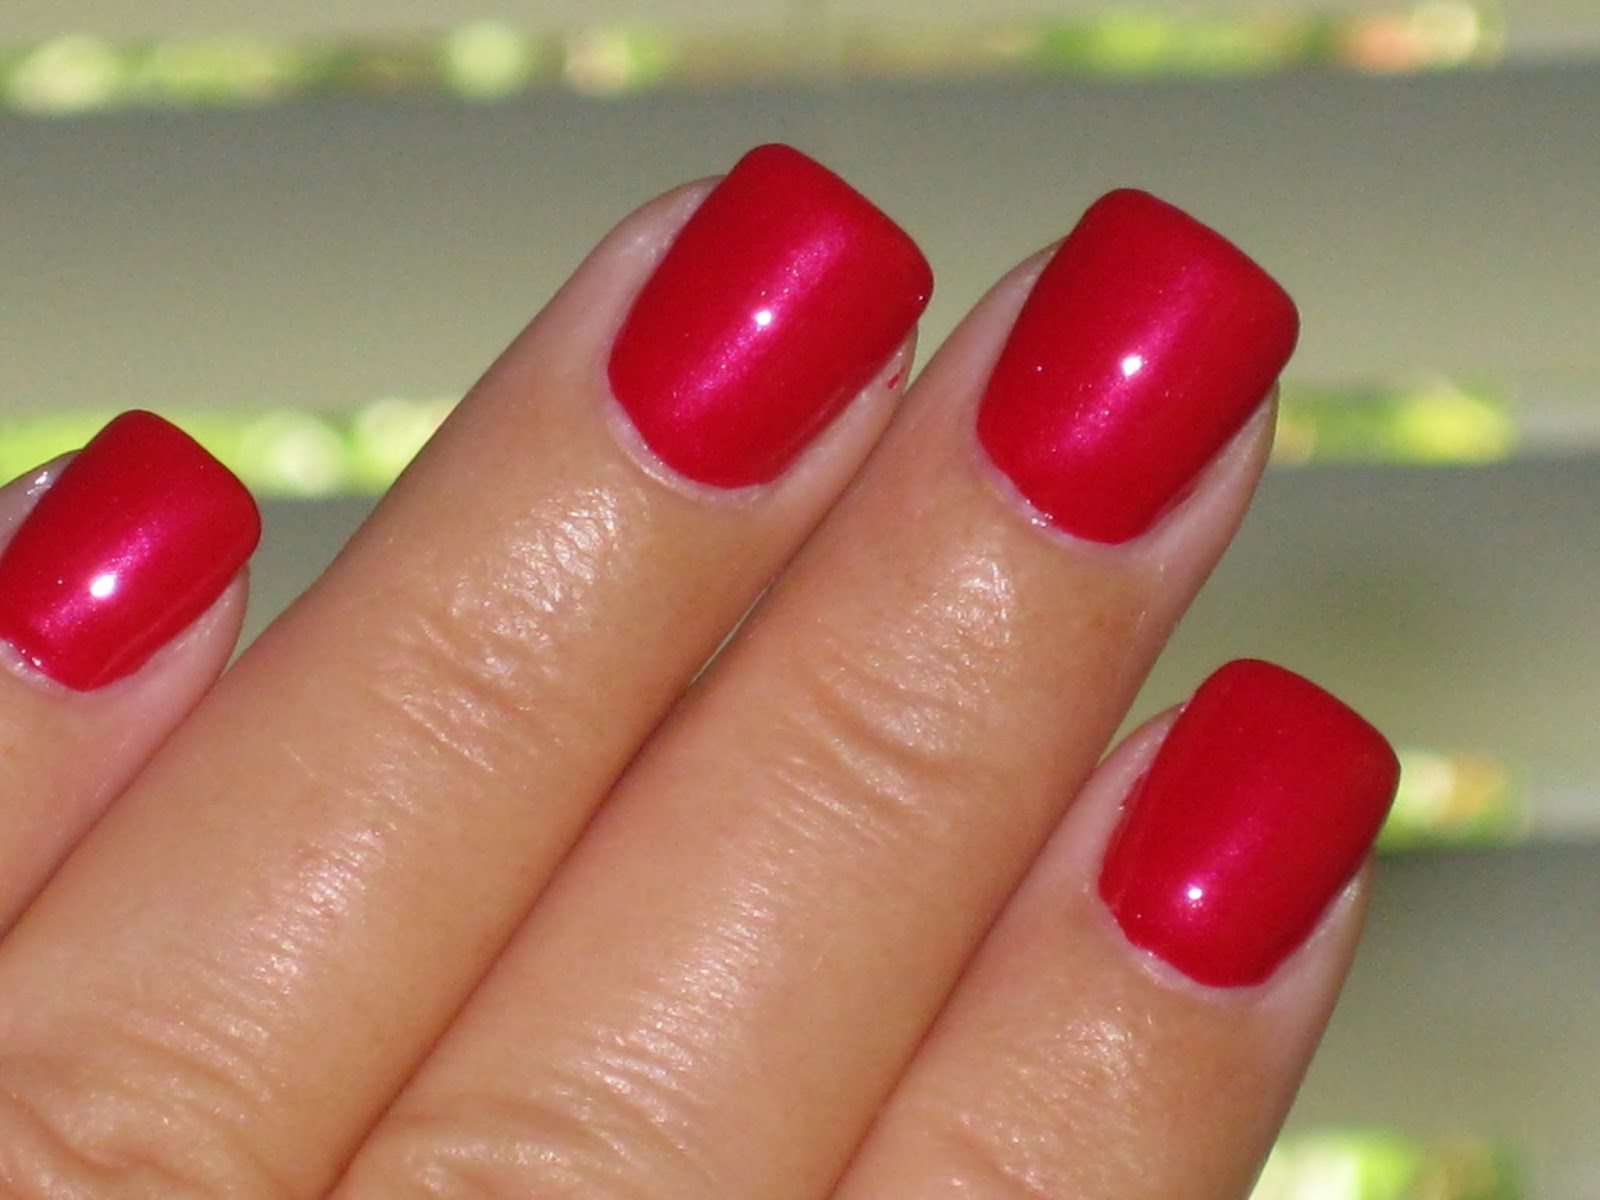 OPI Nail Polish - All Reds - wide 5